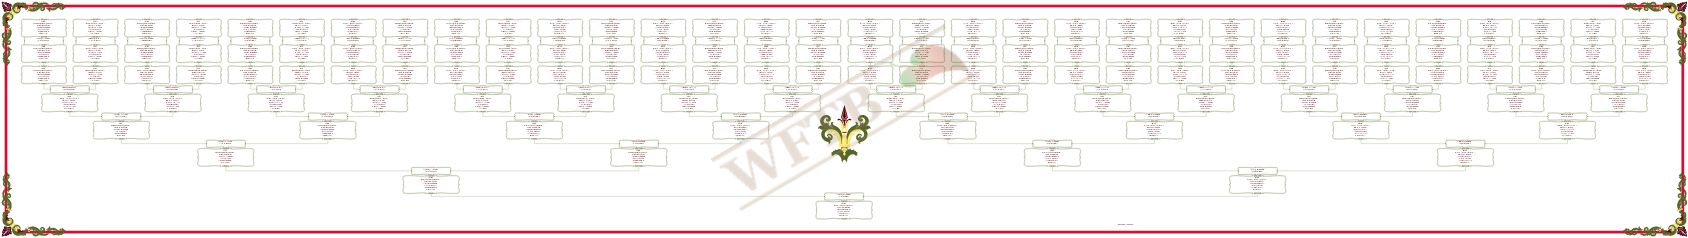 classic-family-tree-7-generations-template-2